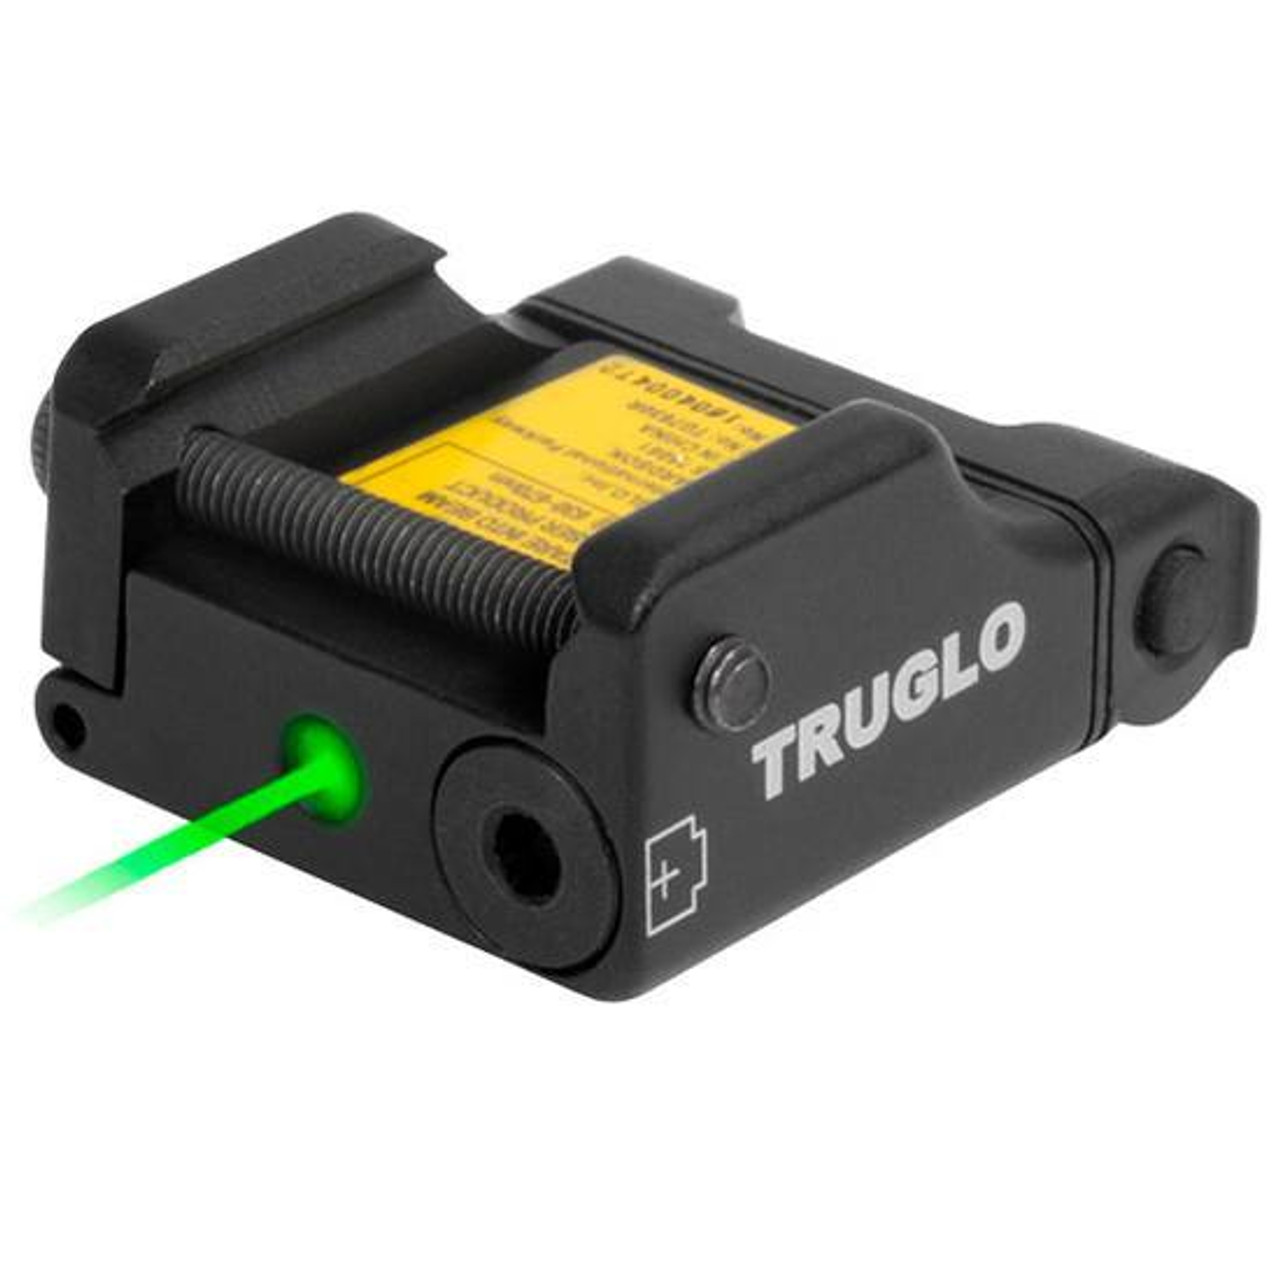 Tactical Red Laser Sight with Mount and Batteries for Picatinny Weaver